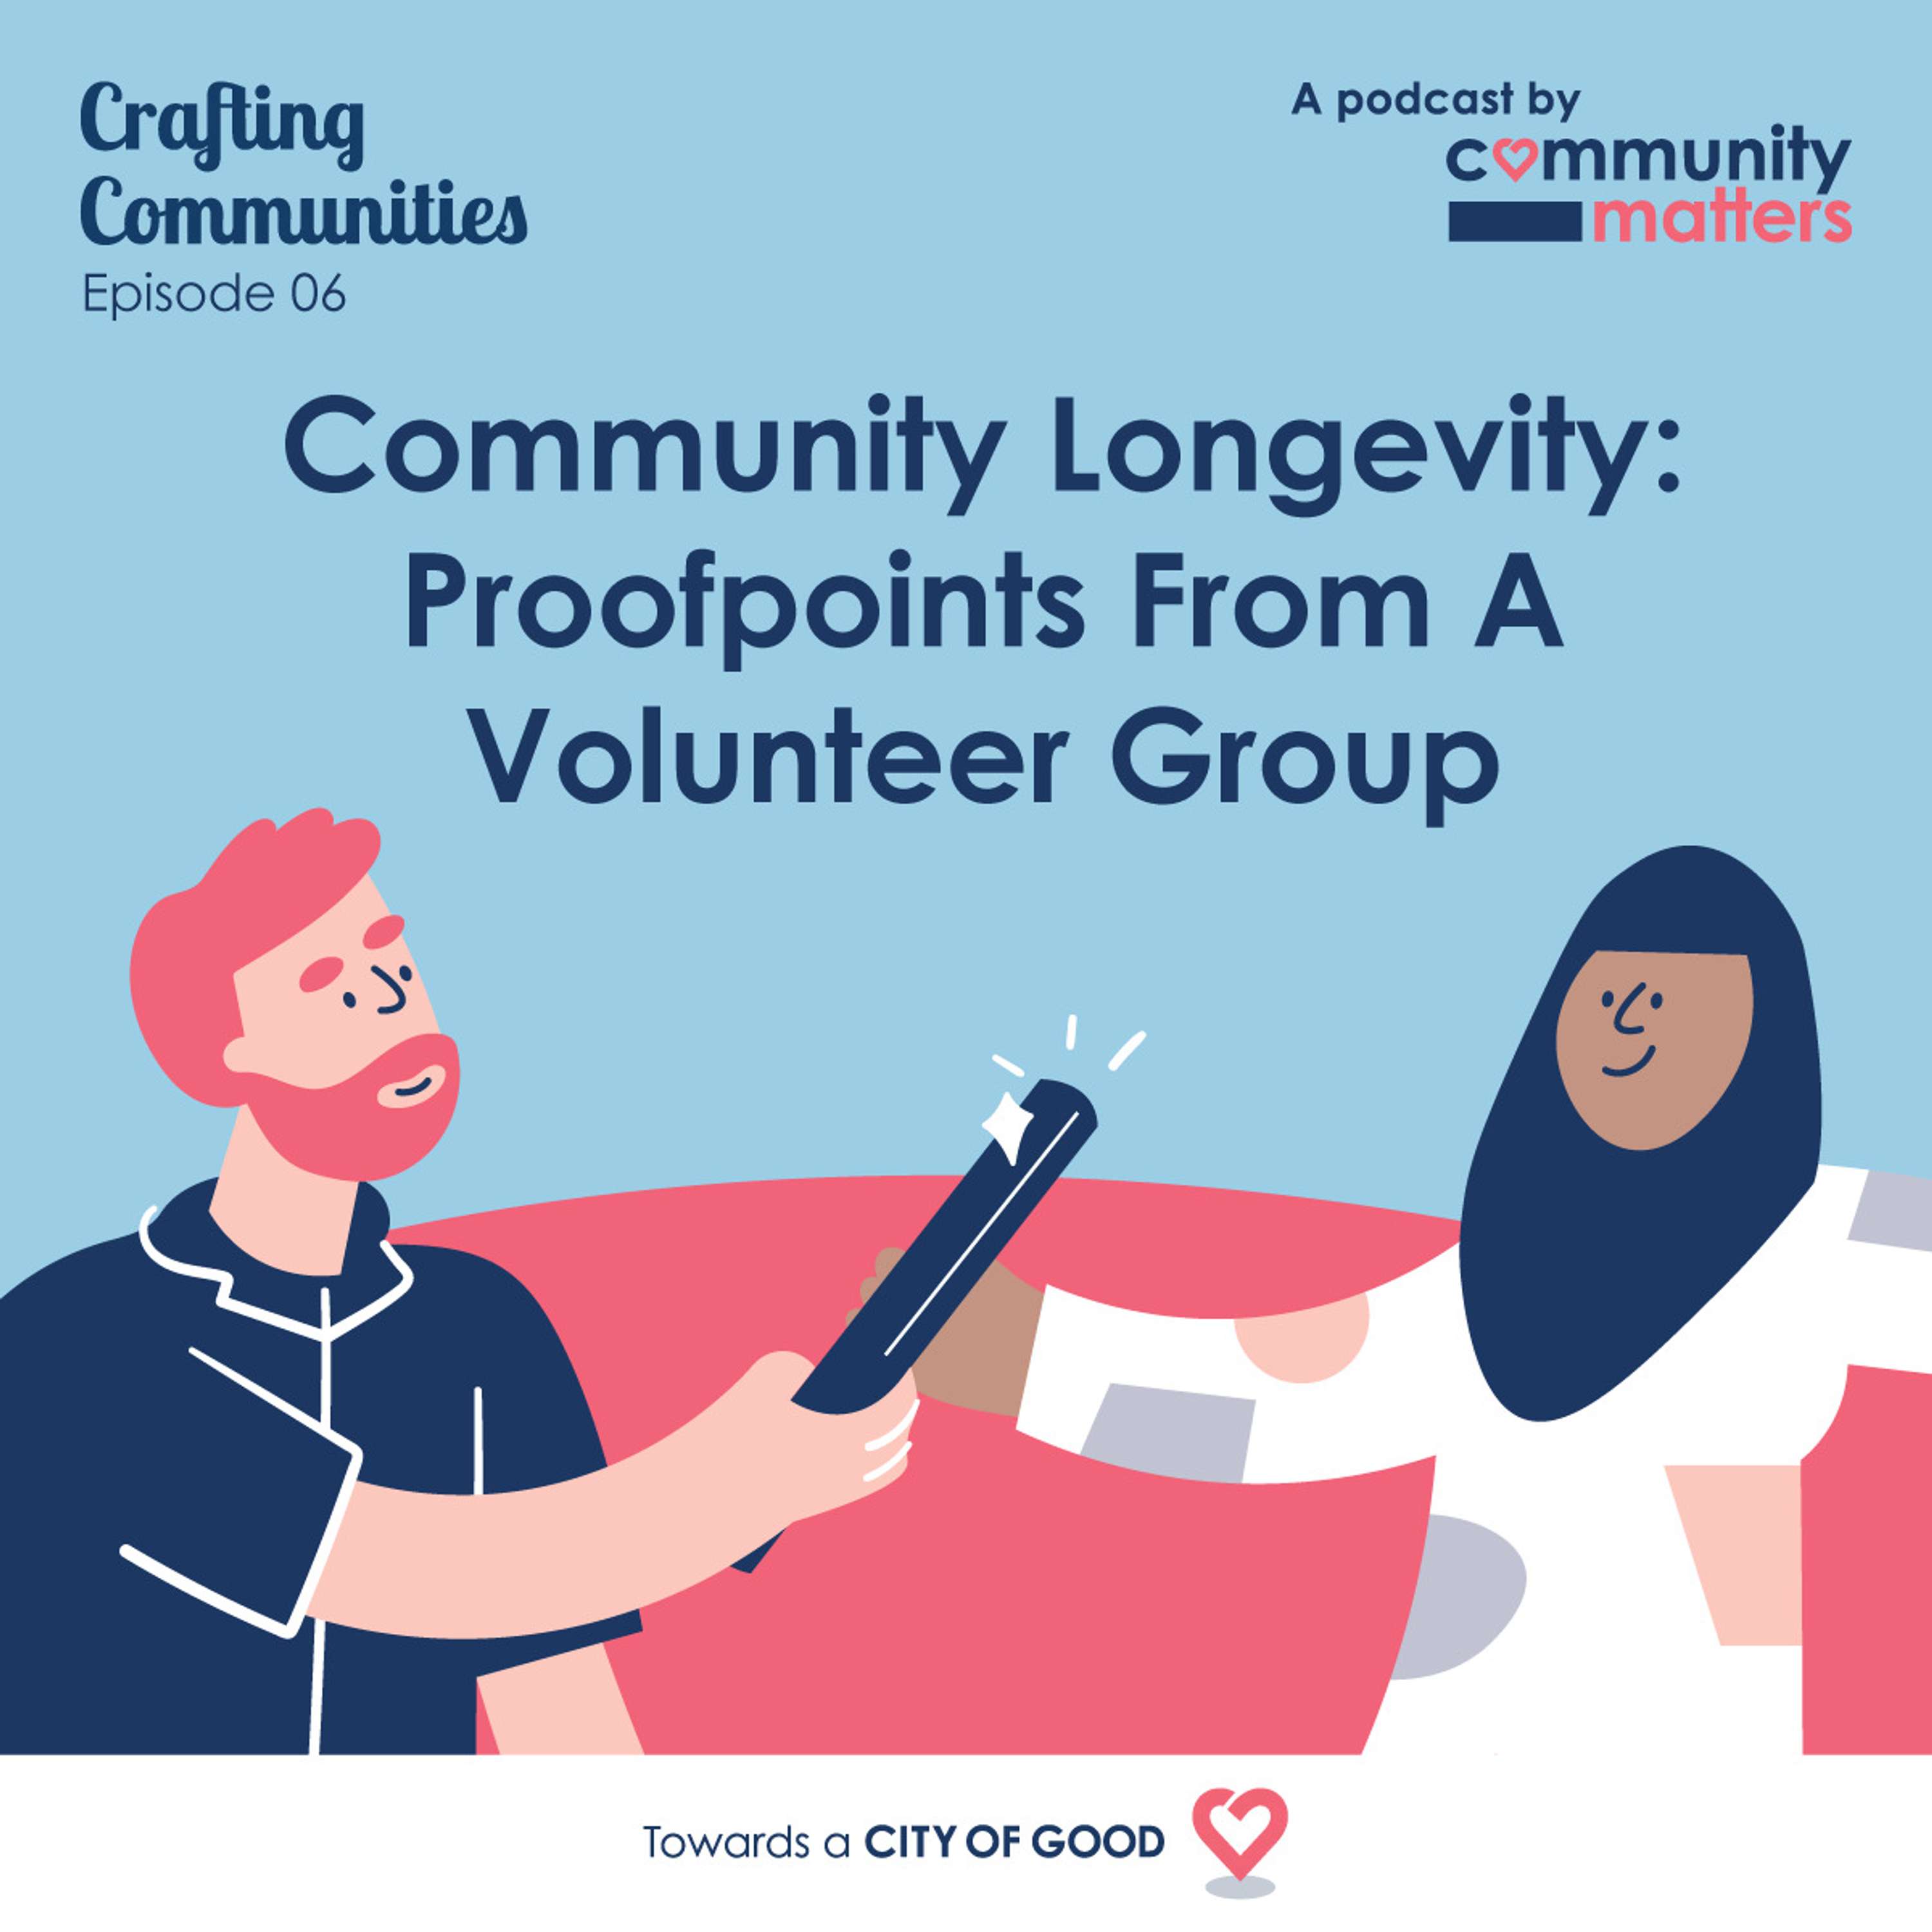 Community Longevity: Proofpoints From A Volunteer Group